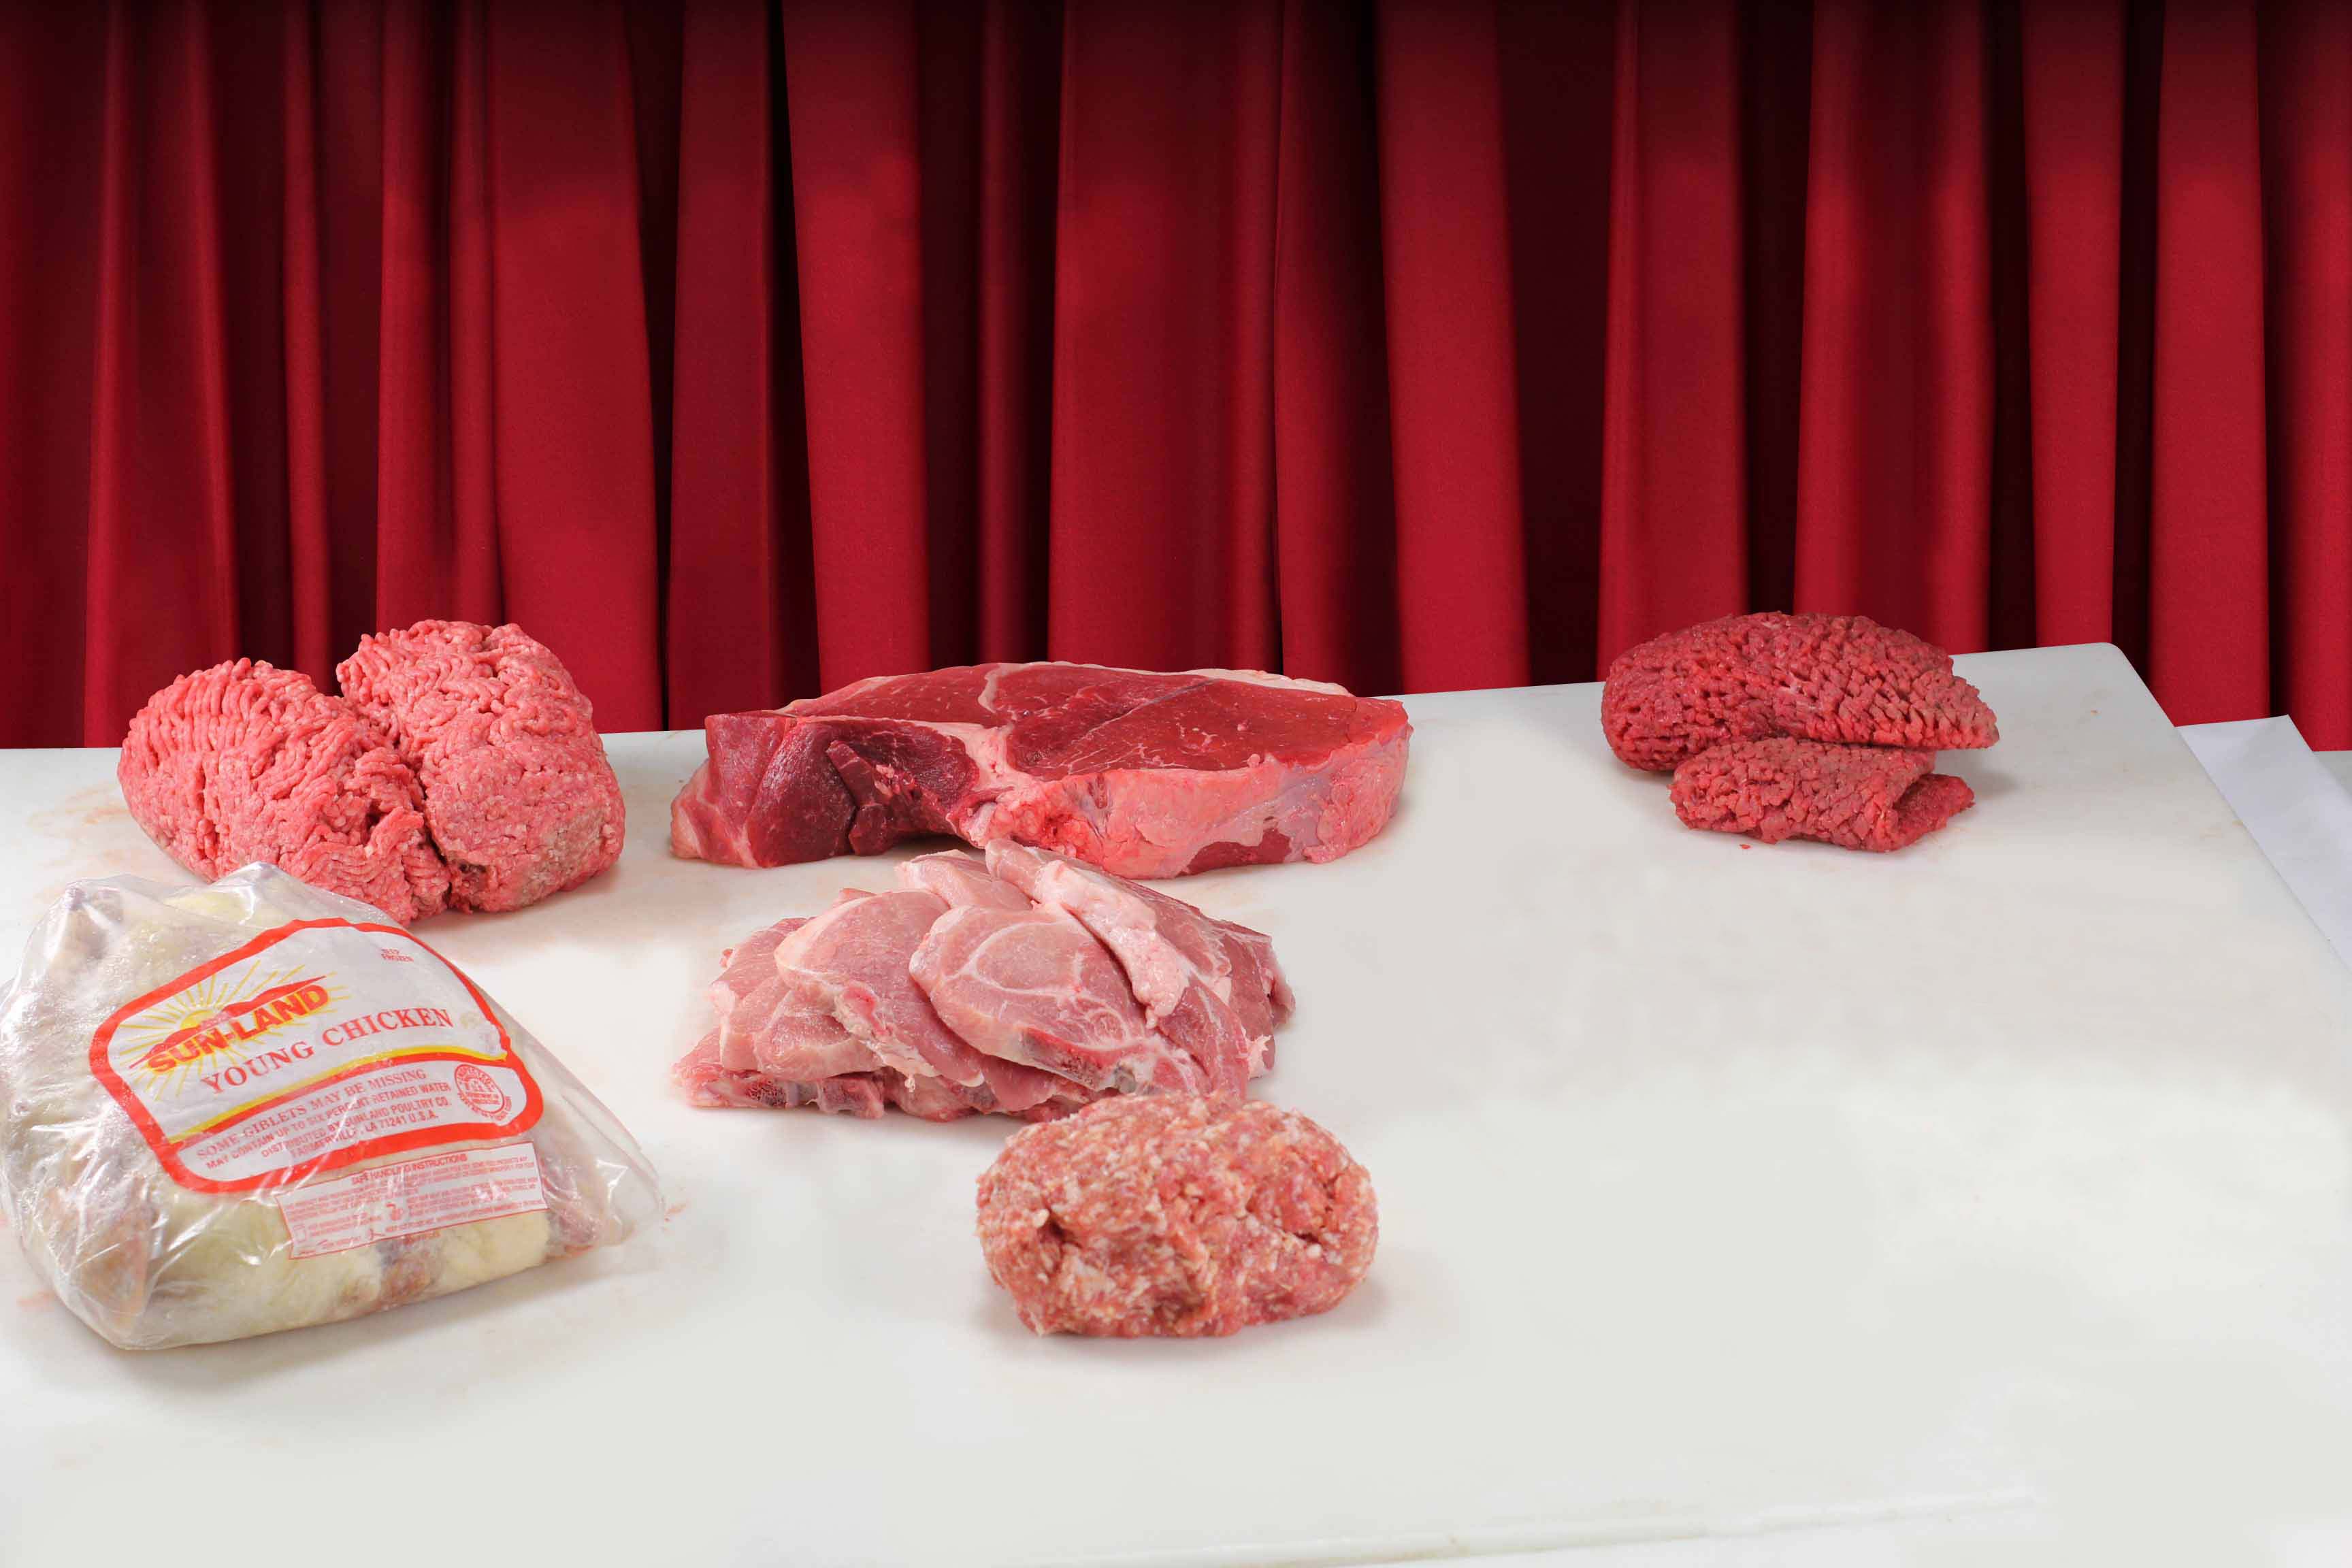 This image icon displays the Purdy's Quality Meats Mini Budget Pack image